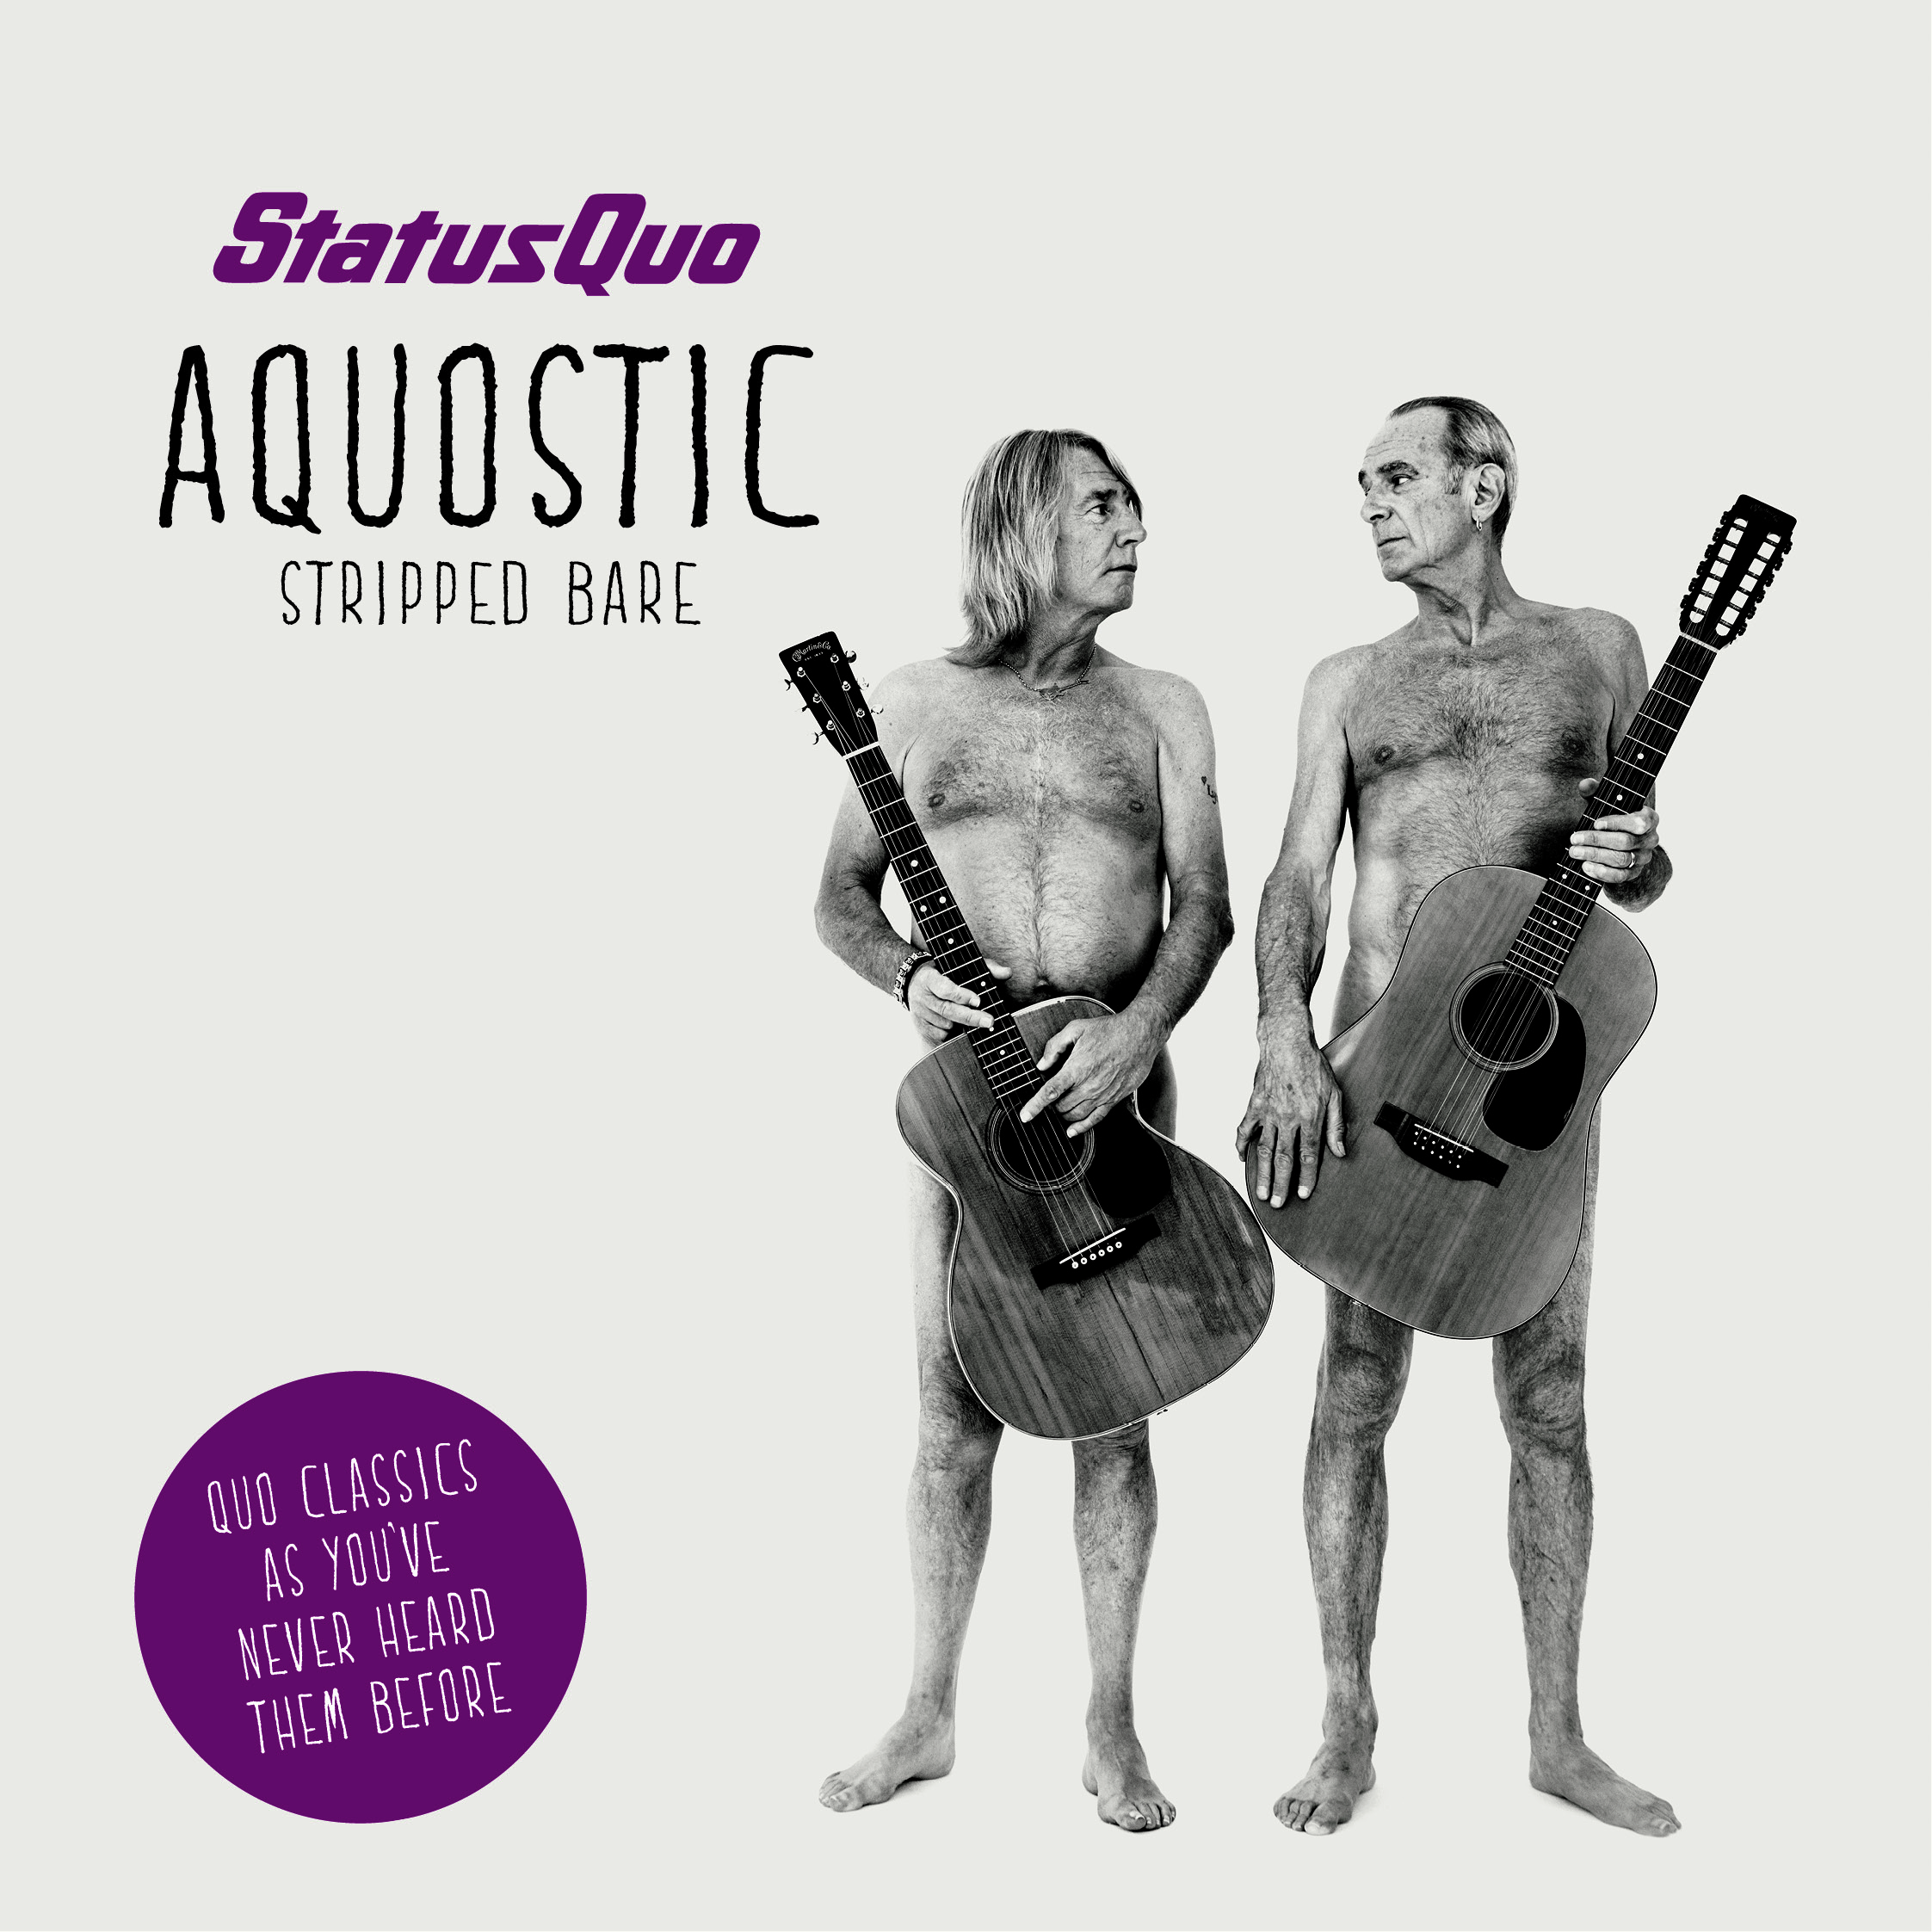 Status Quo - Aquostic (Stripped Bare) (CD + 7'' - 2xCD